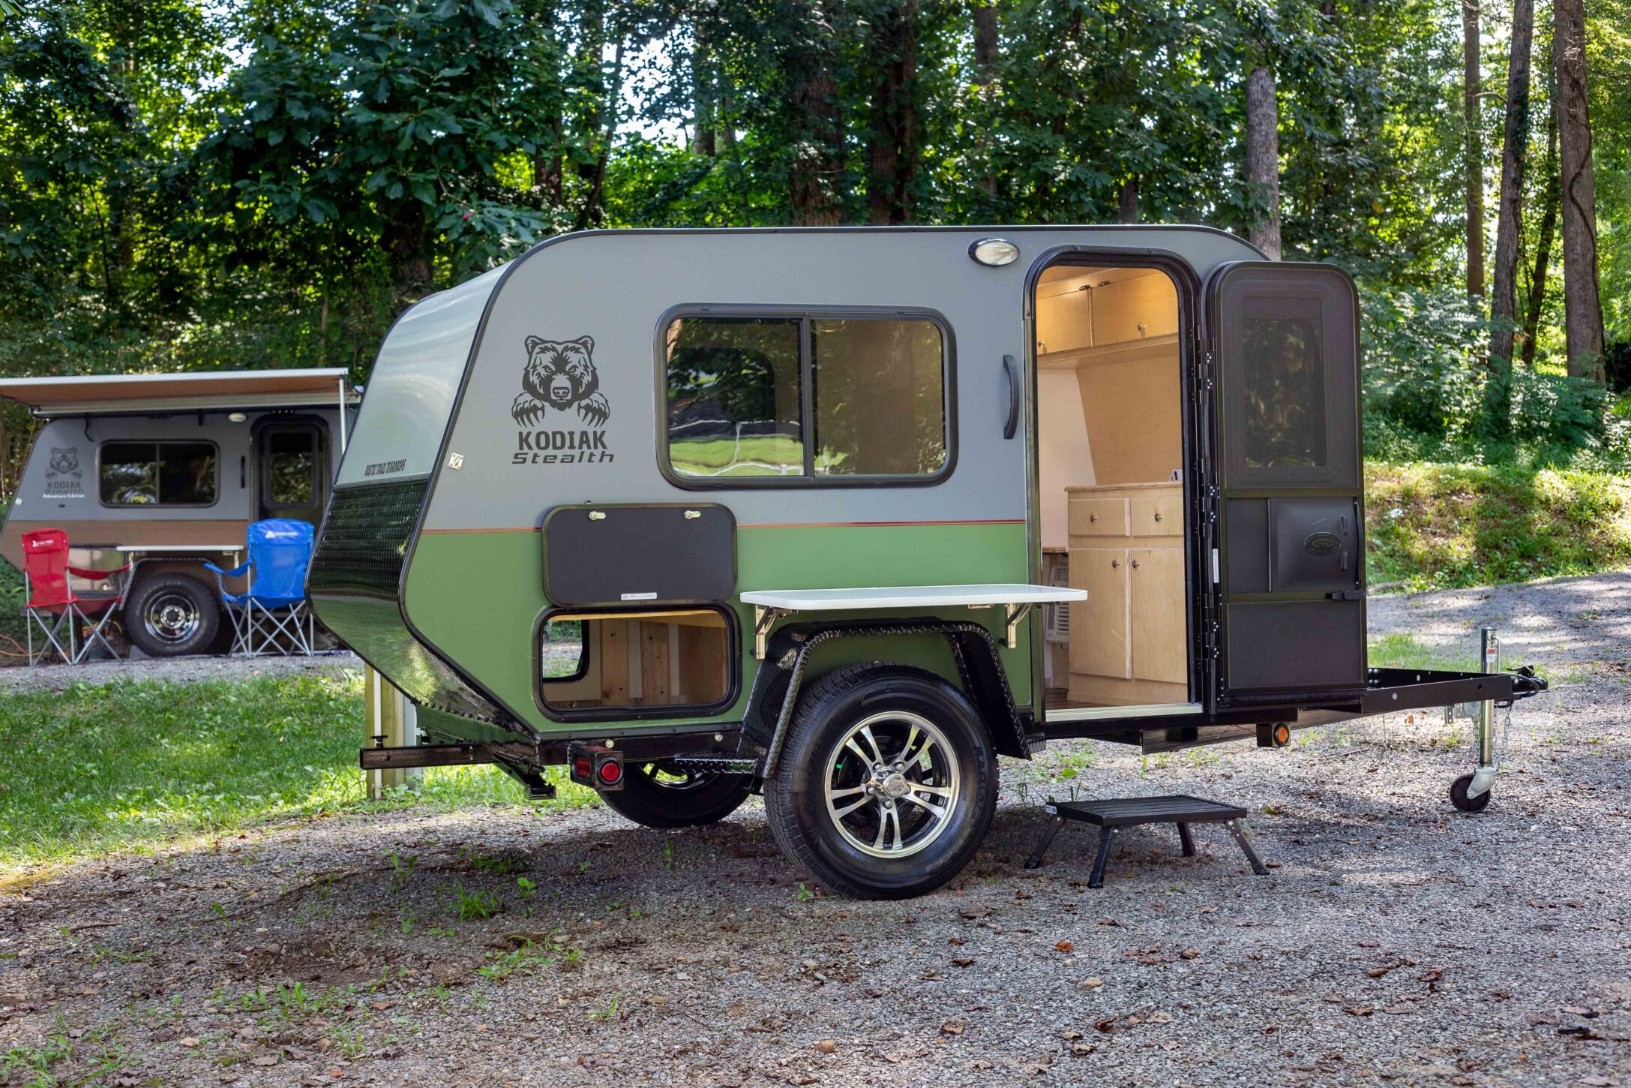 Kodiak Stealth Teardrop Camper Offers the Most Bang for the Least Buck